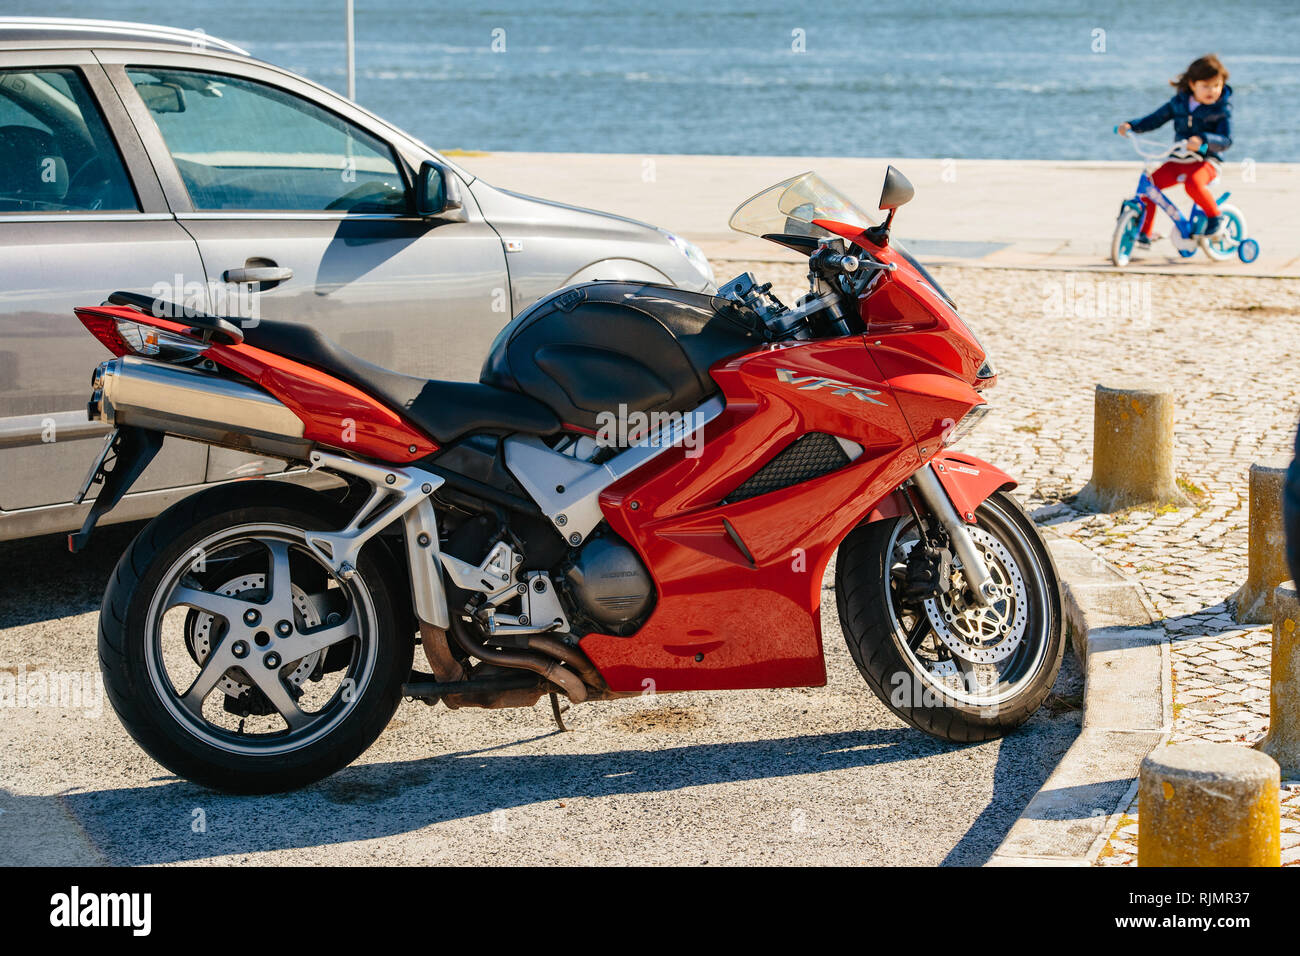 LISBON, PORTUGAL - FEB 10, 2018: Side view of trendy Honda VFR moto modern  motorcycle of red color parked on city street in sunlight Stock Photo -  Alamy